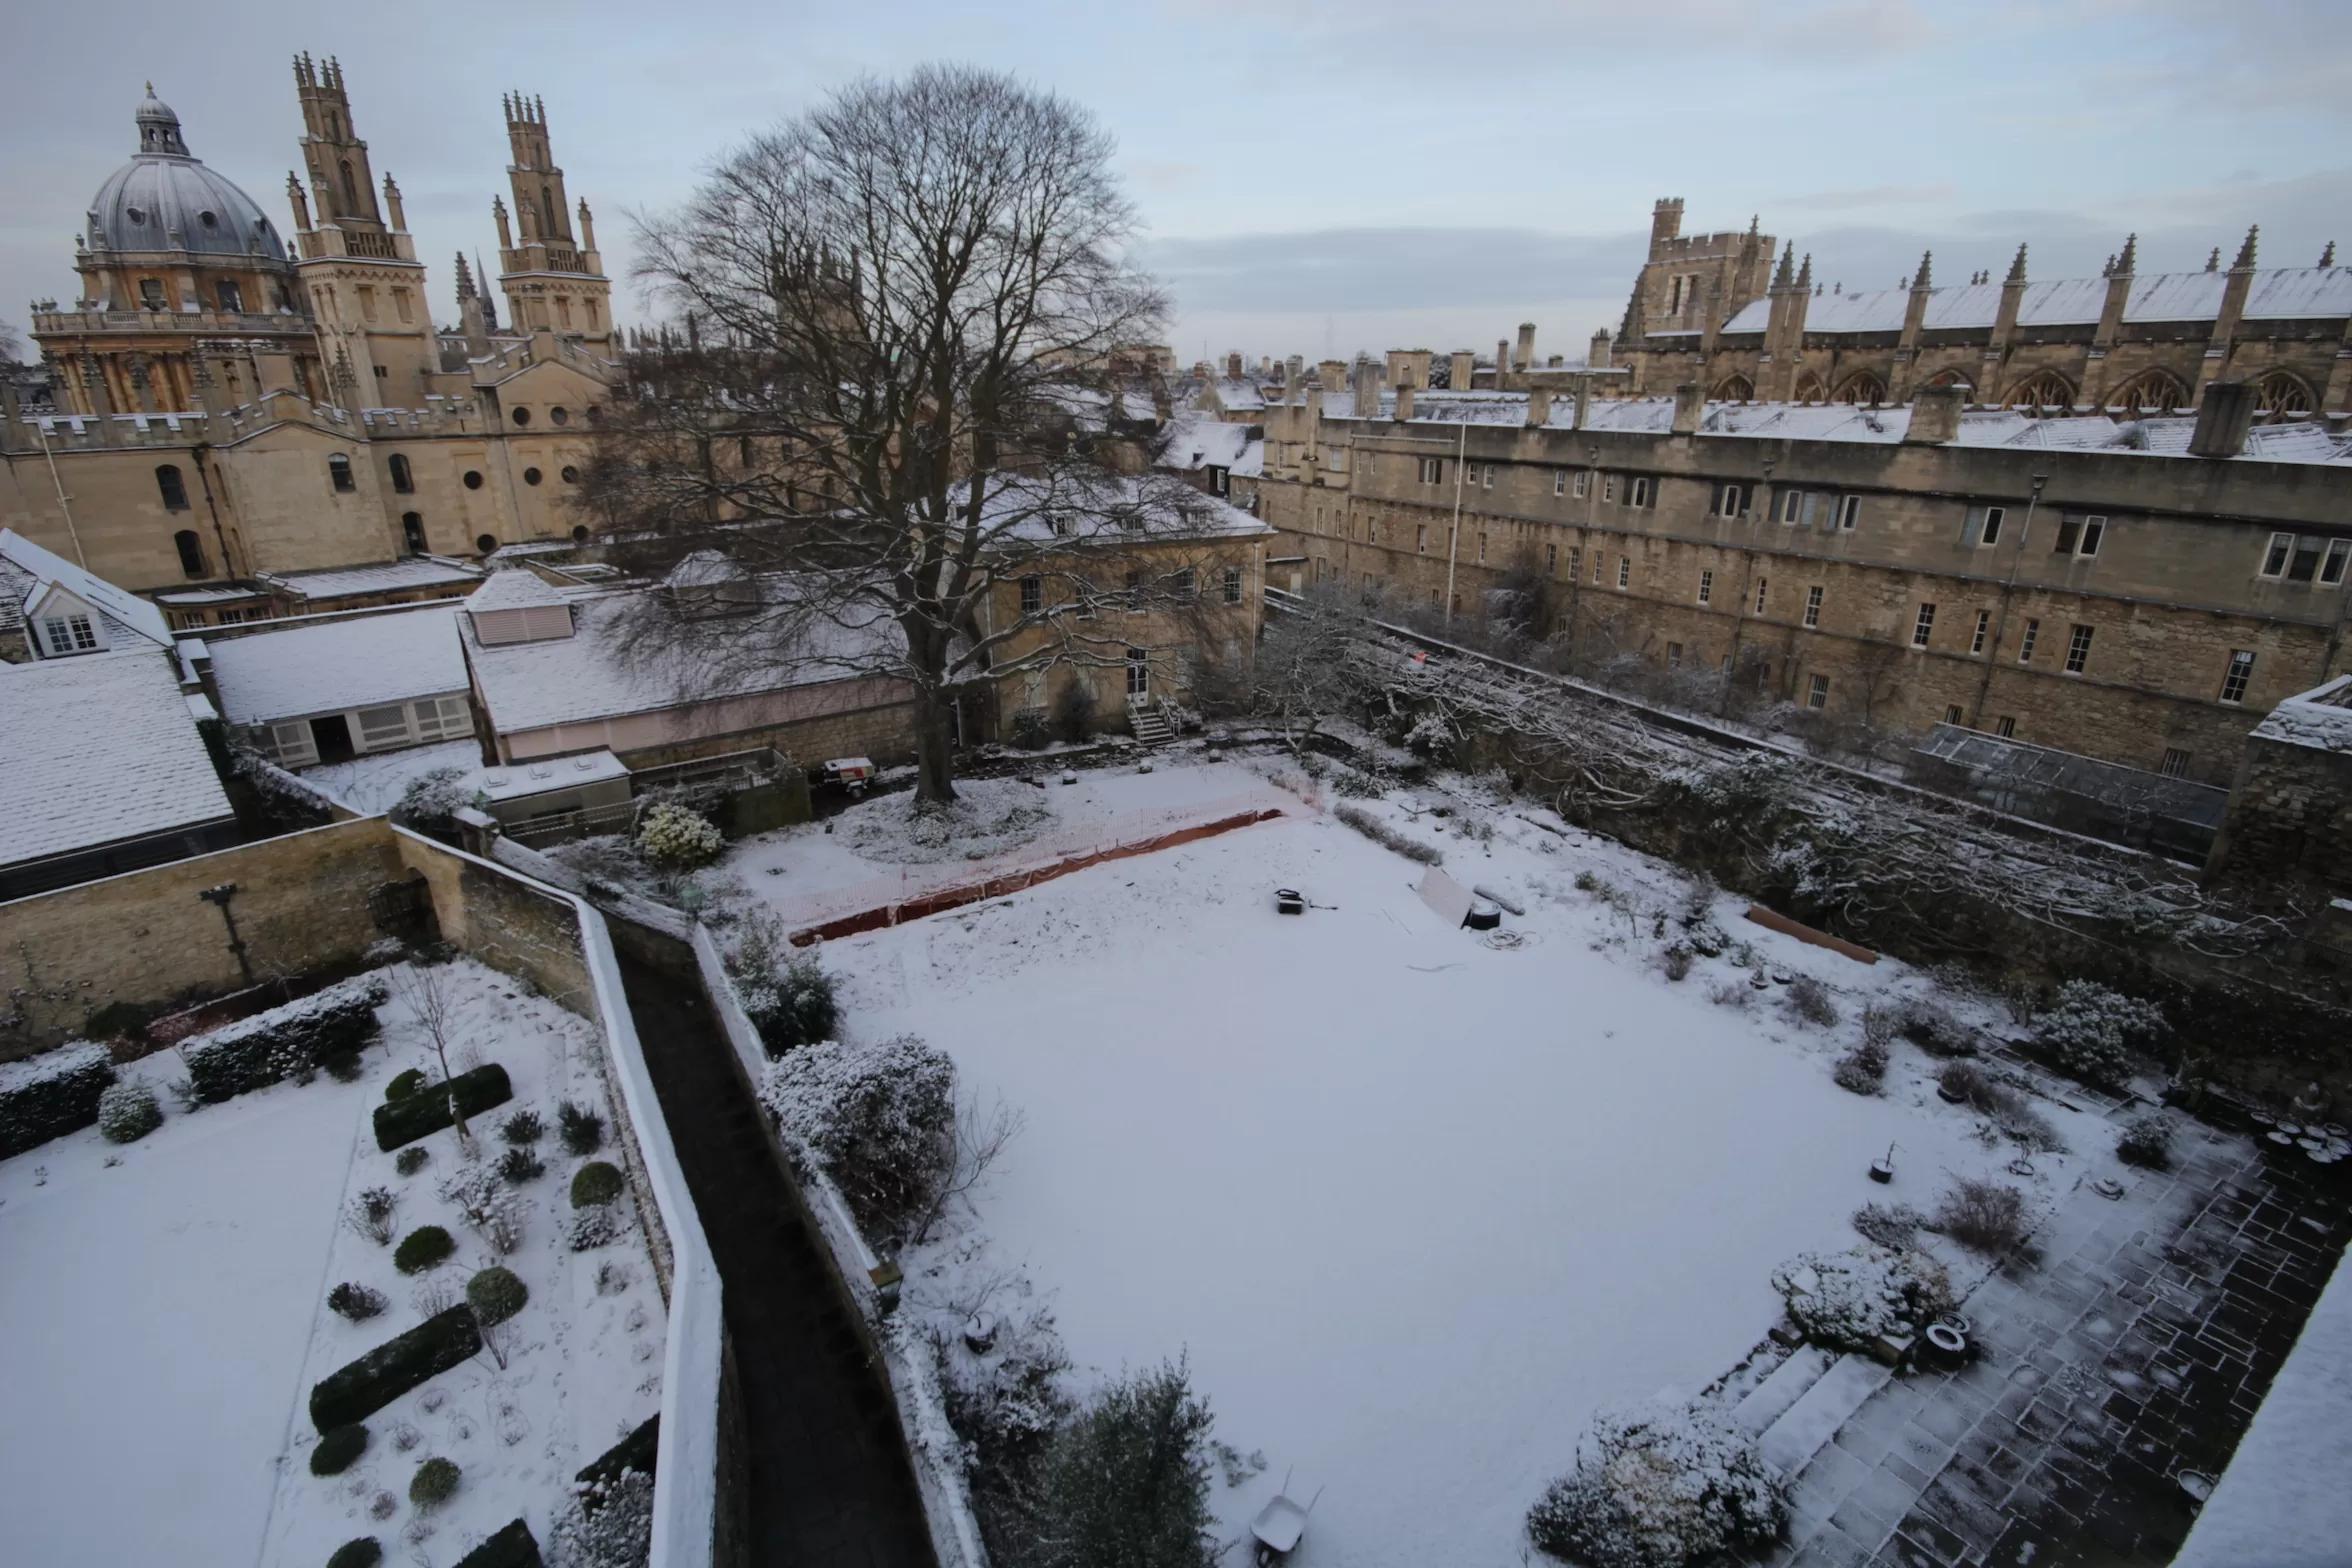 Time-lapsing the Thames Valley. Snow on the ground at the University of Oxford